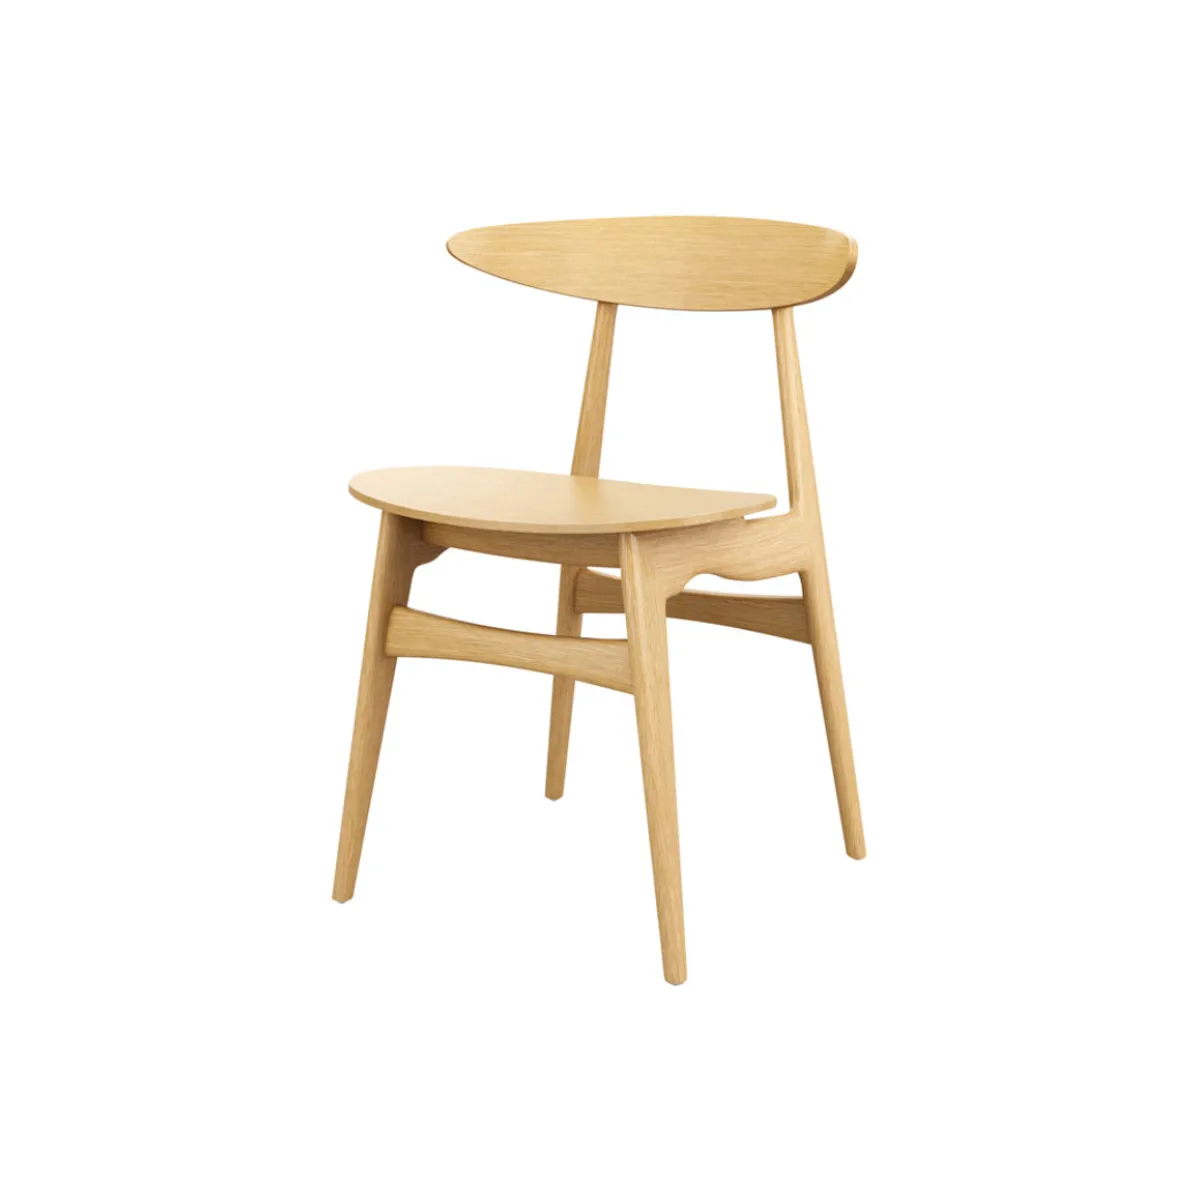 Ramsey side chair